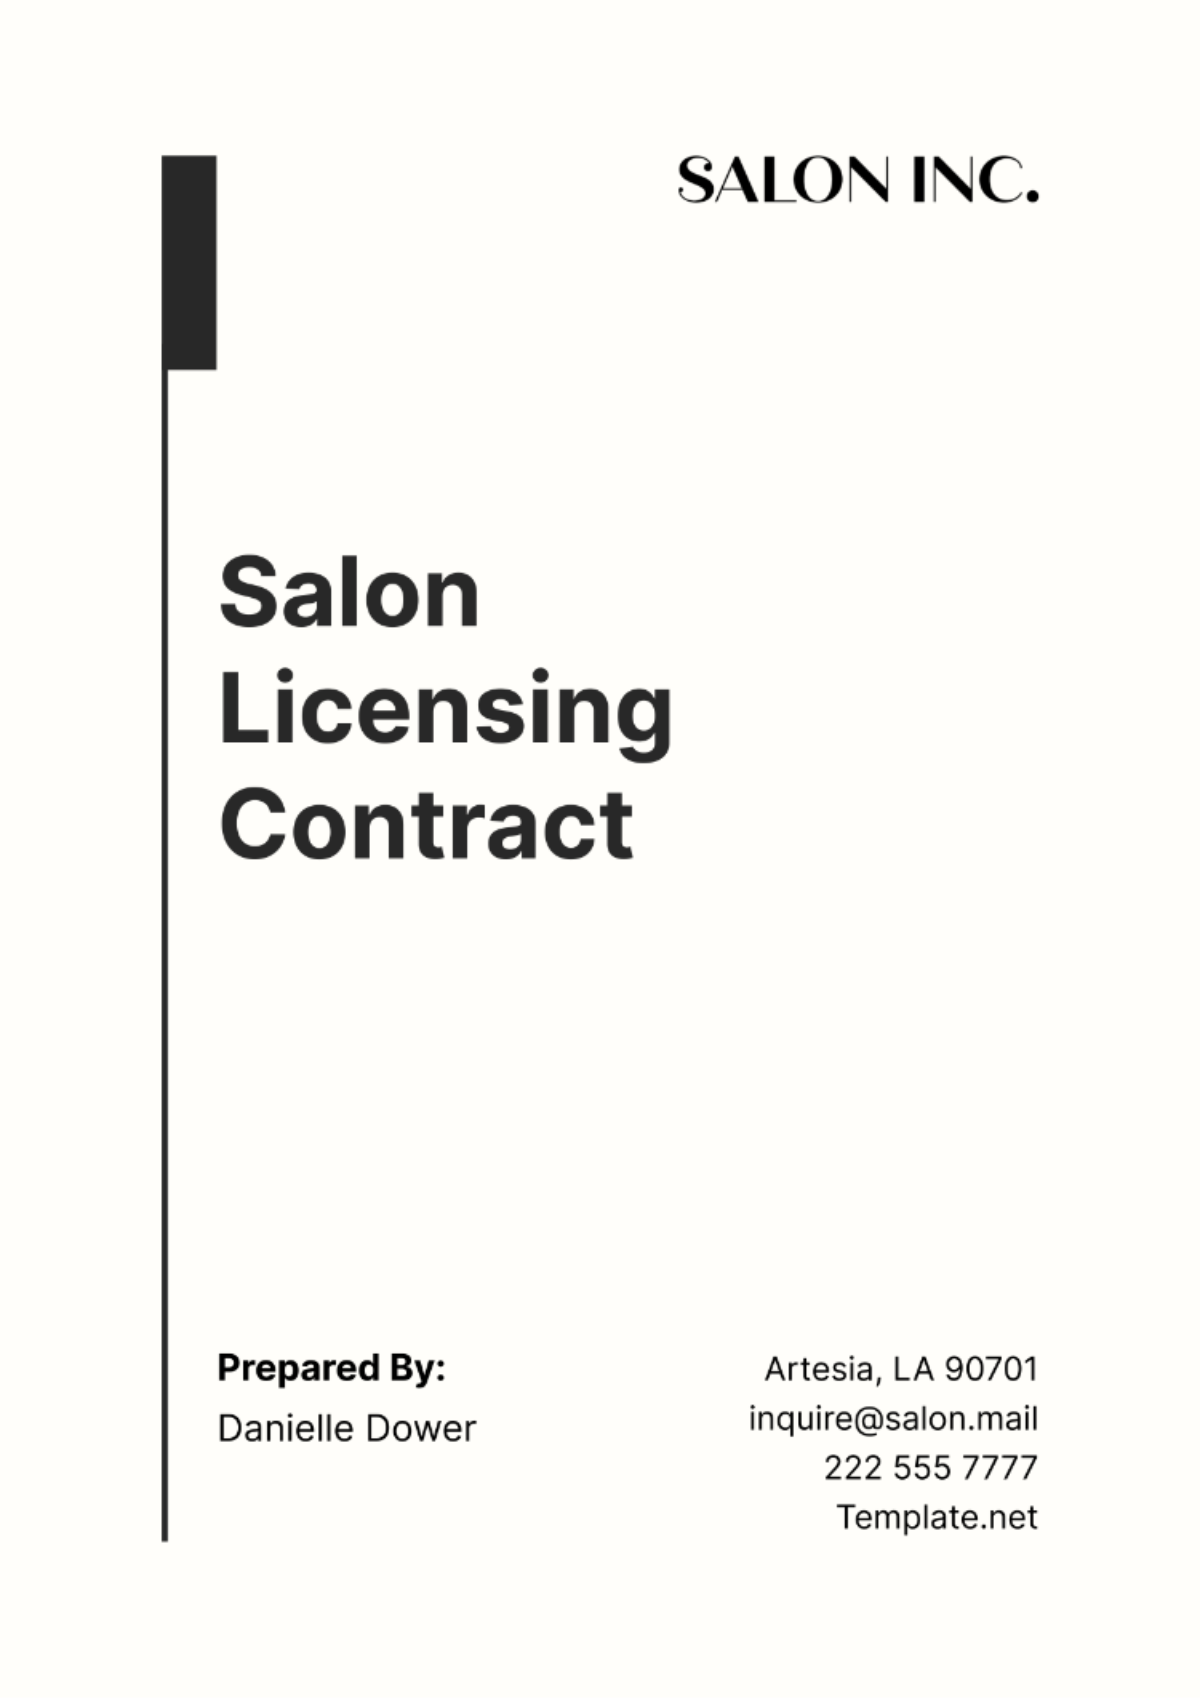 Salon Licensing Contract Template